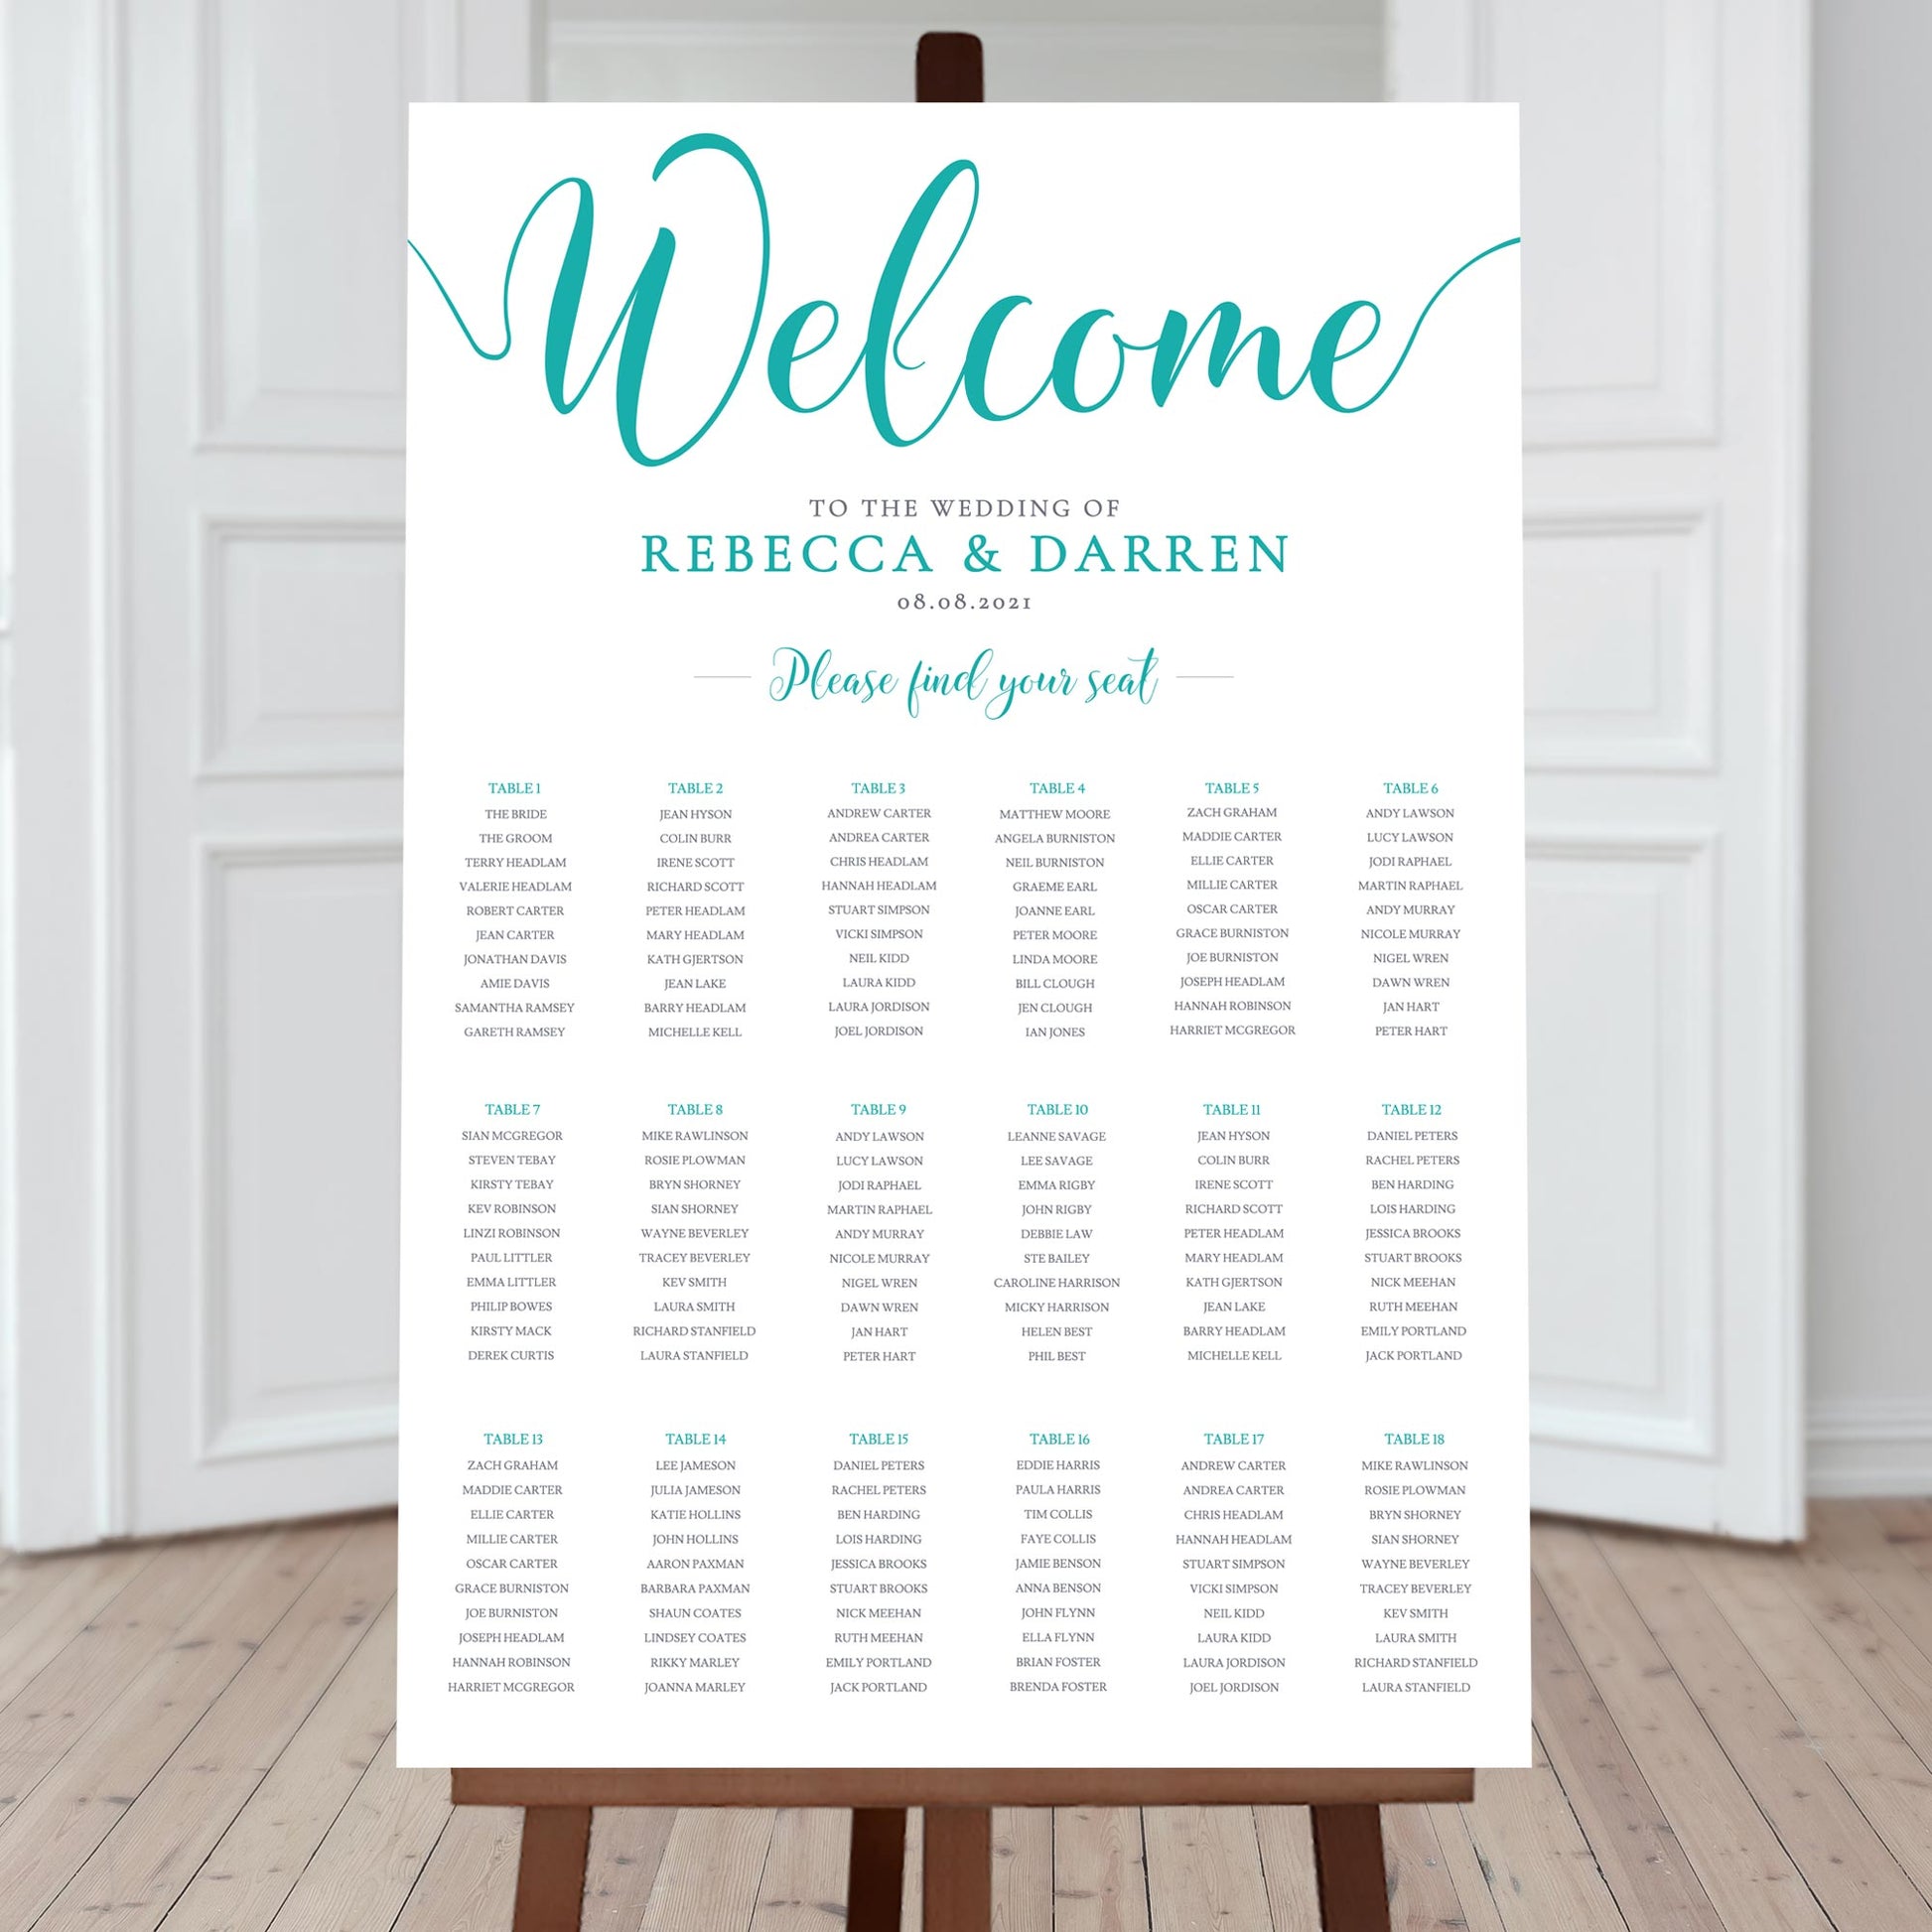 18 table turquoise seating chart at wedding reception